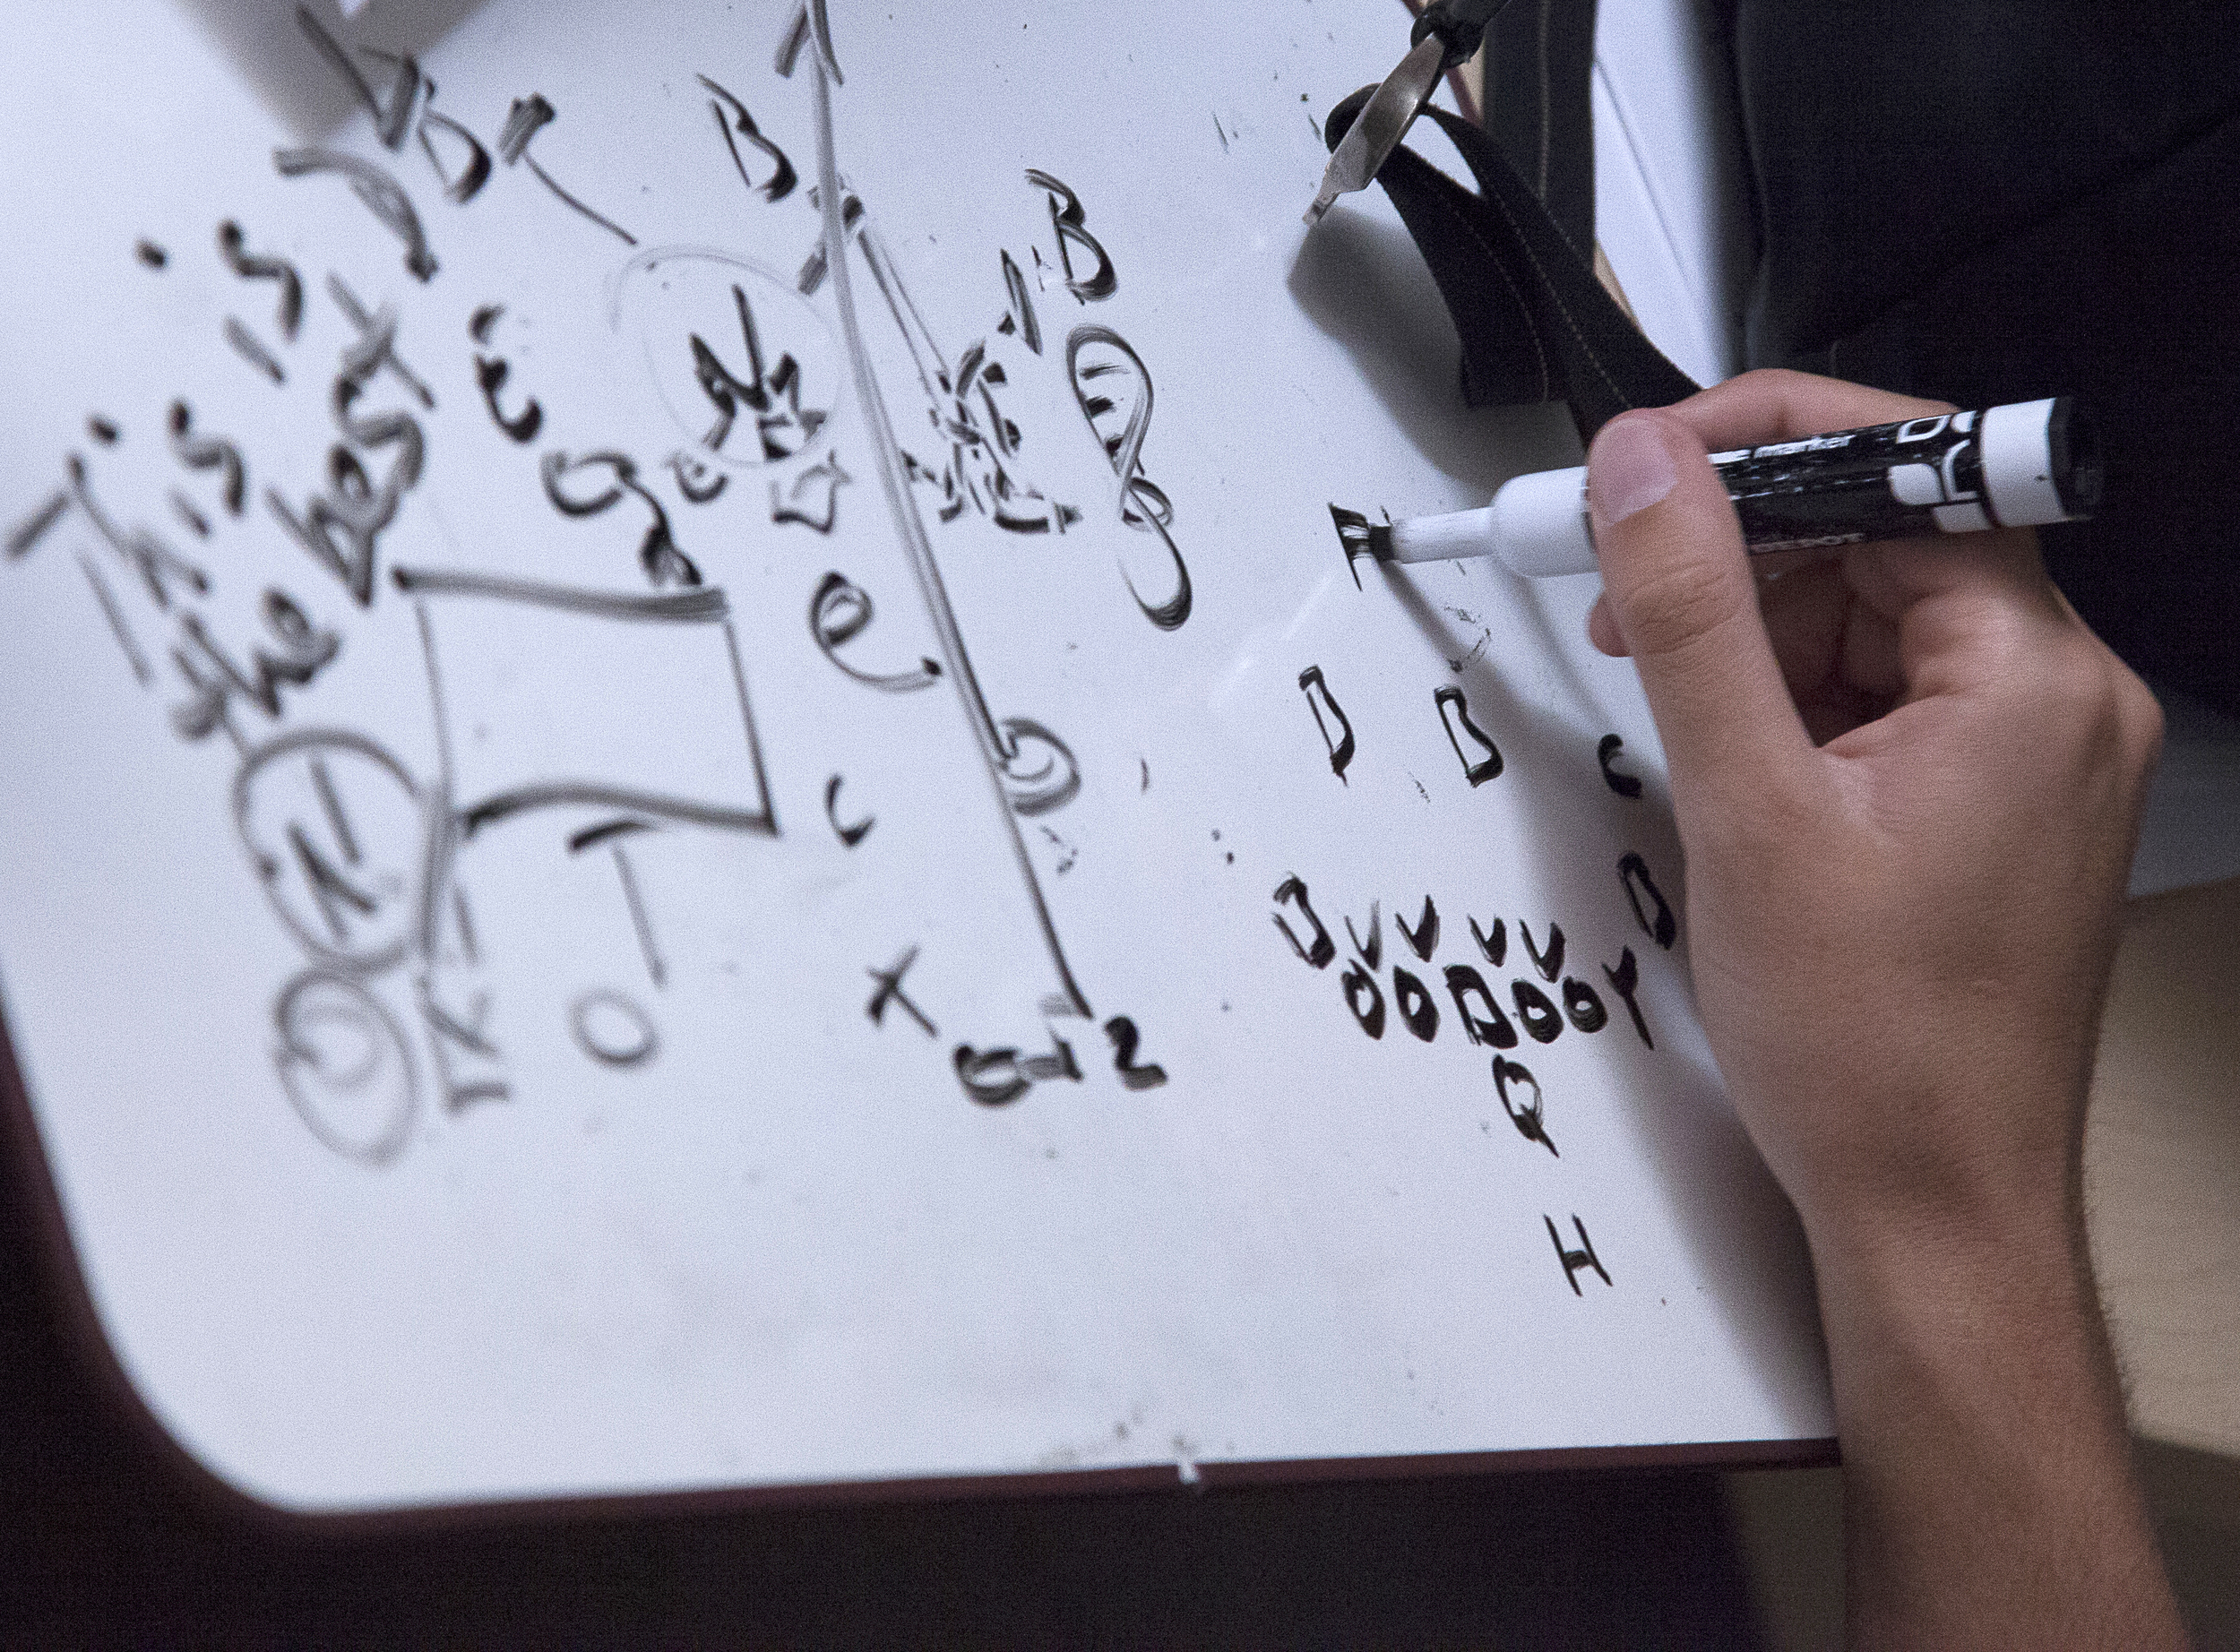  Football plays are drawn on a dry erase board inside the “war room” on Thursday, May 21, 2015. The “war room” is where the defensive team of Pierce College’s football team meet. Woodland Hills, Calif. 